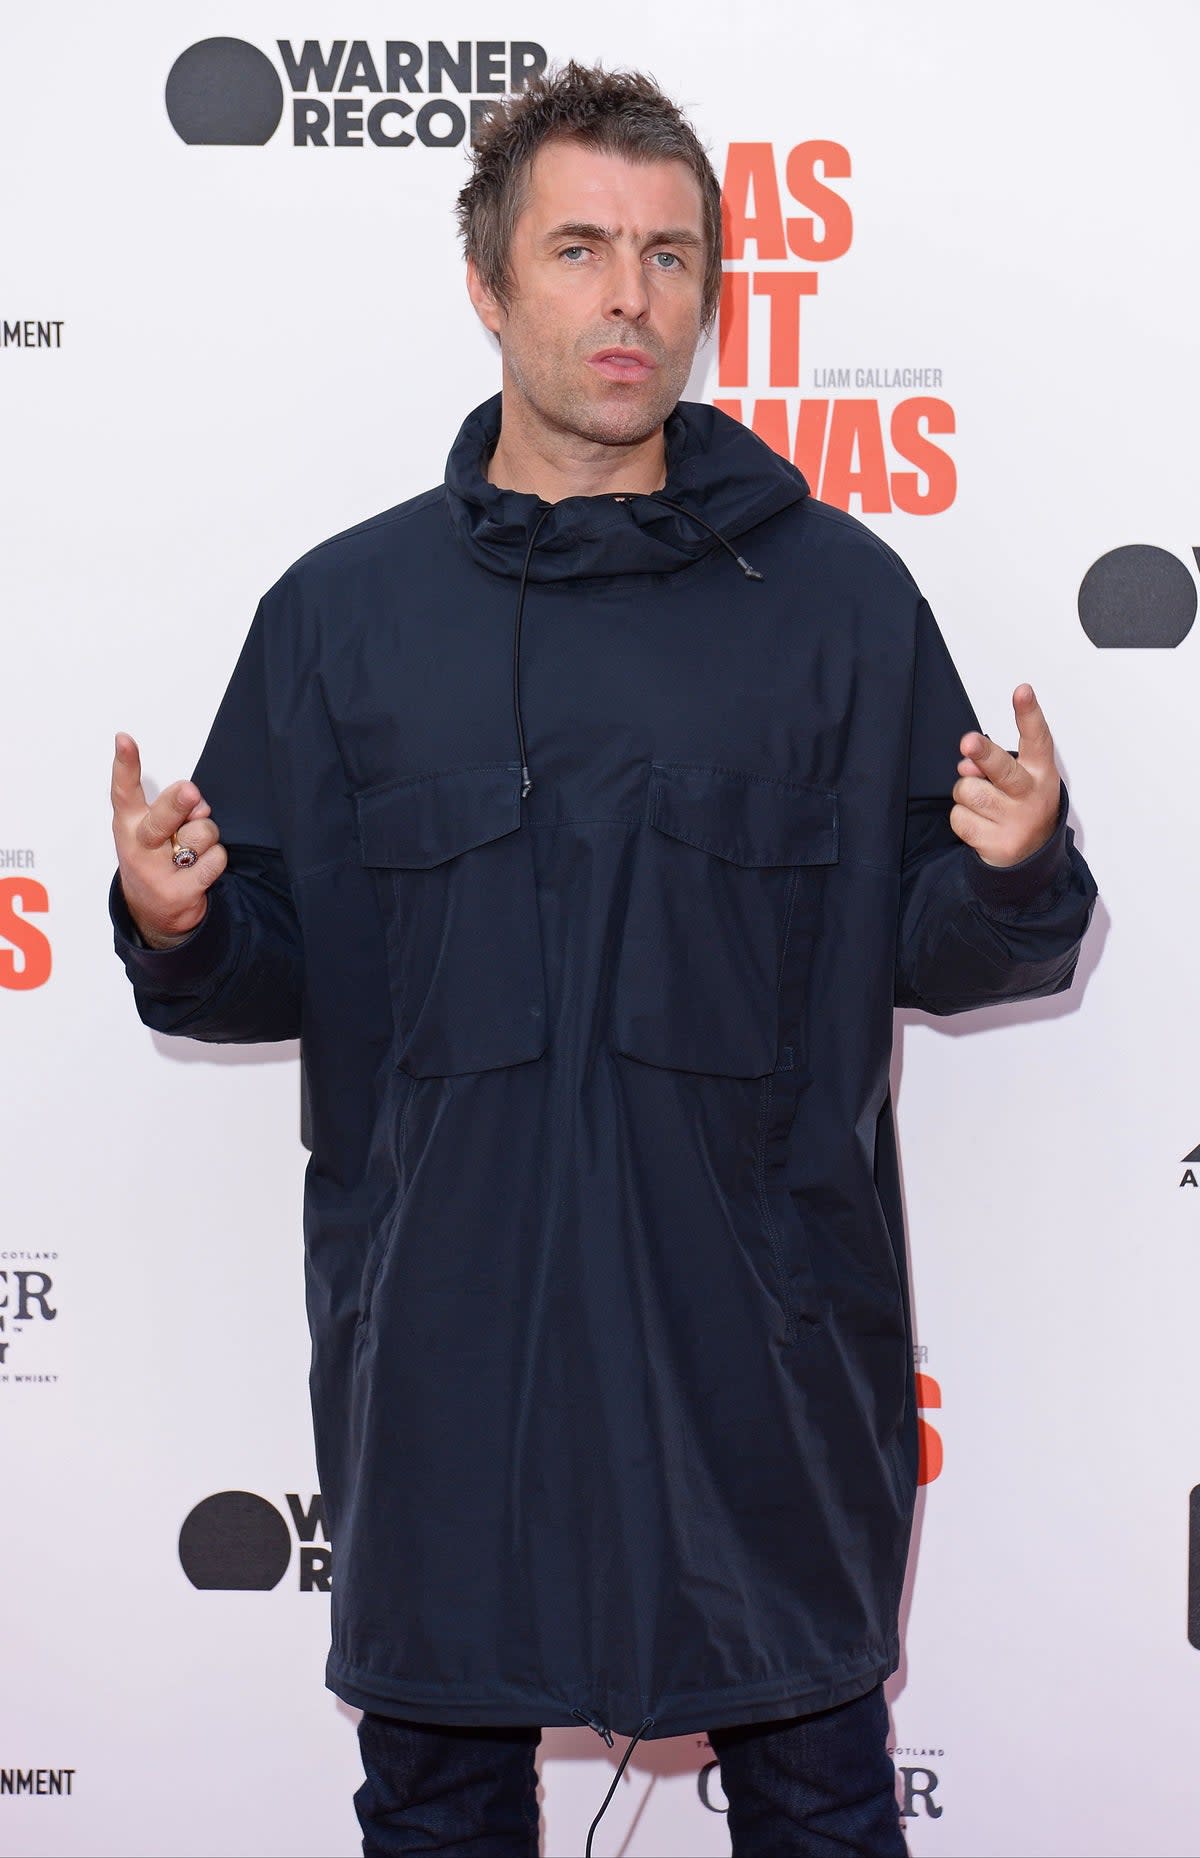 Liam Gallagher attends the World Premiere of "Liam Gallagher: As It Was" (Getty Images)